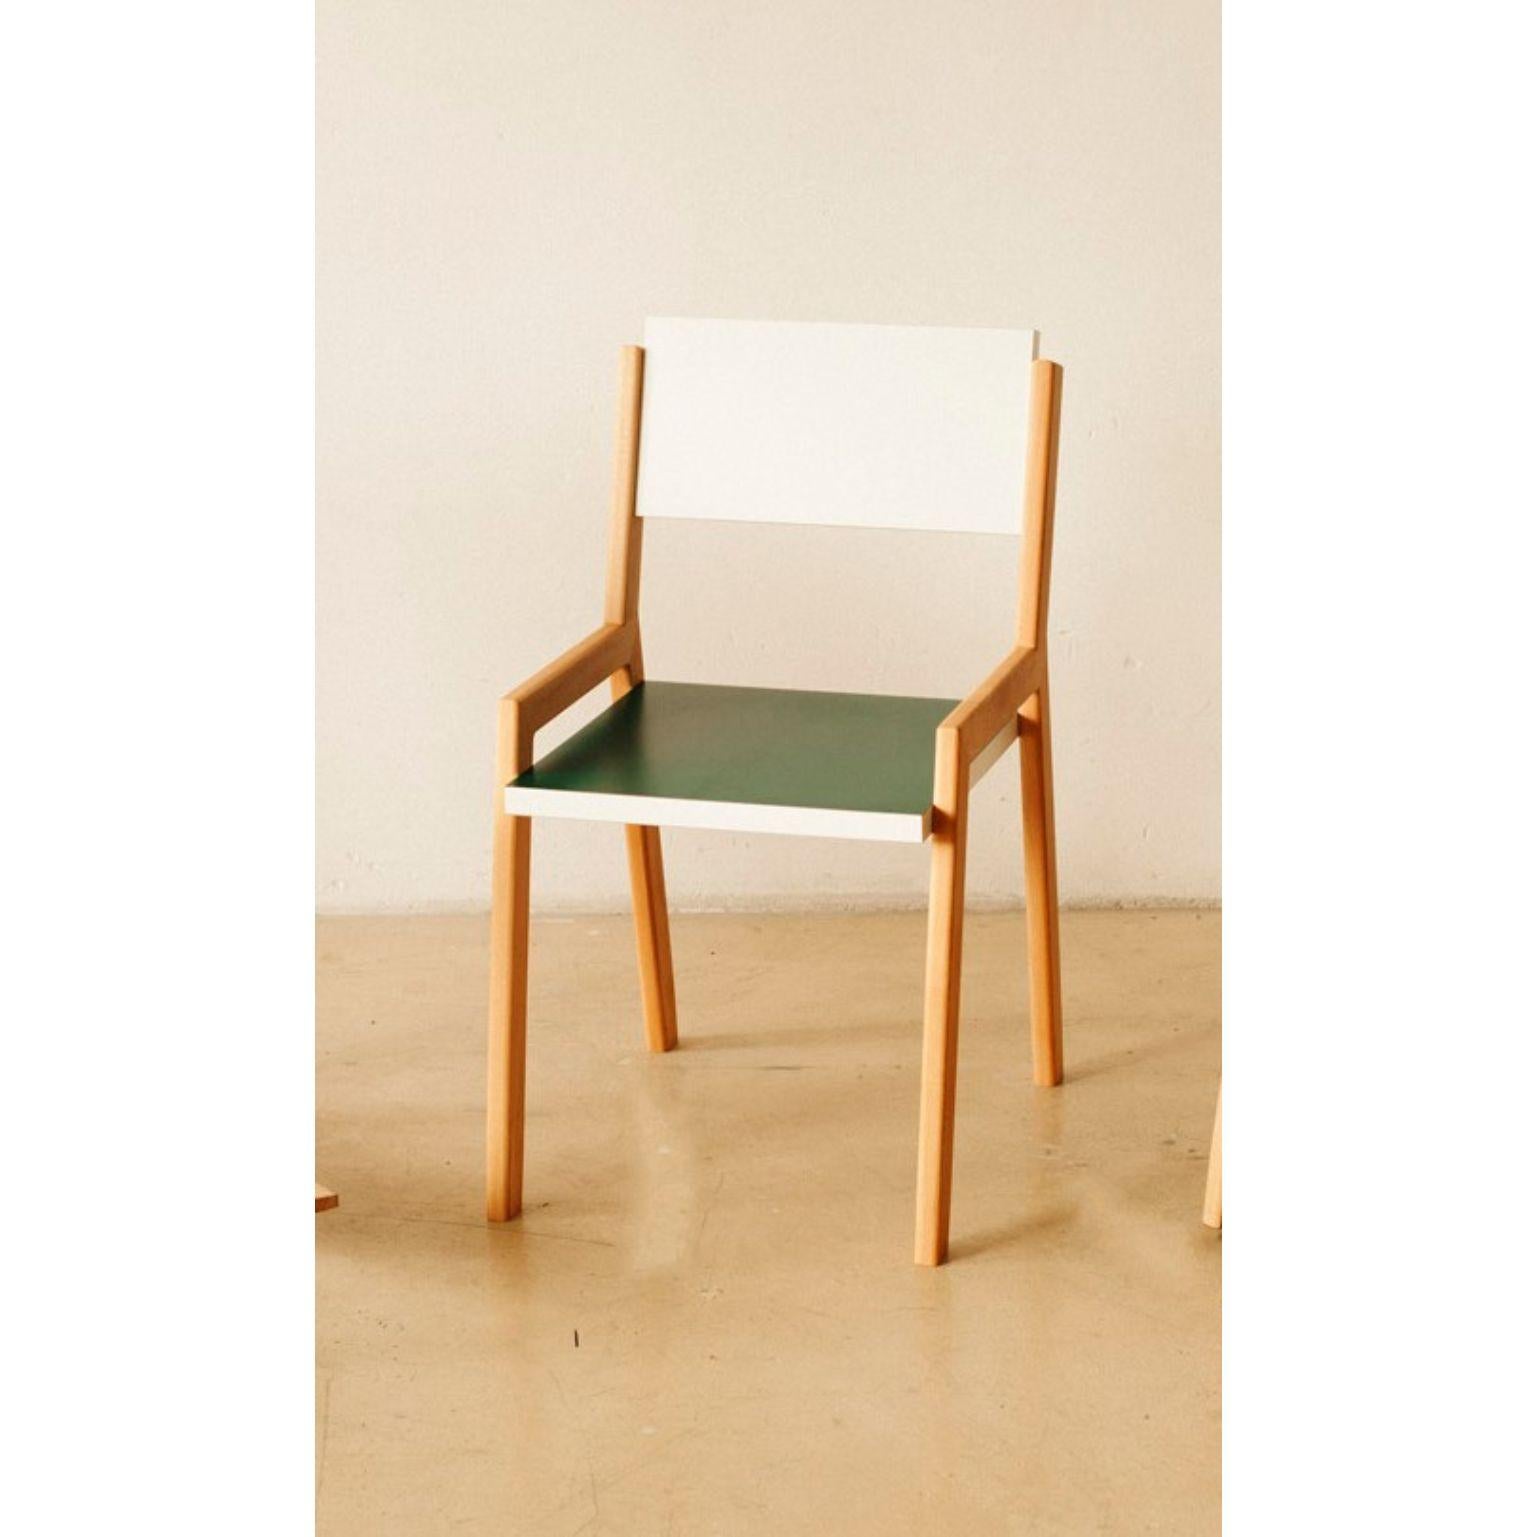 Formica chair by owl
Dimensions: H 85 x W 45 x D 50 cm
 Seat H: 45 cm
Materials: Solid wood, colourful formica

Formica is a series in which material defines form. The collection combines solid wood with colourful Formica, creating a furniture